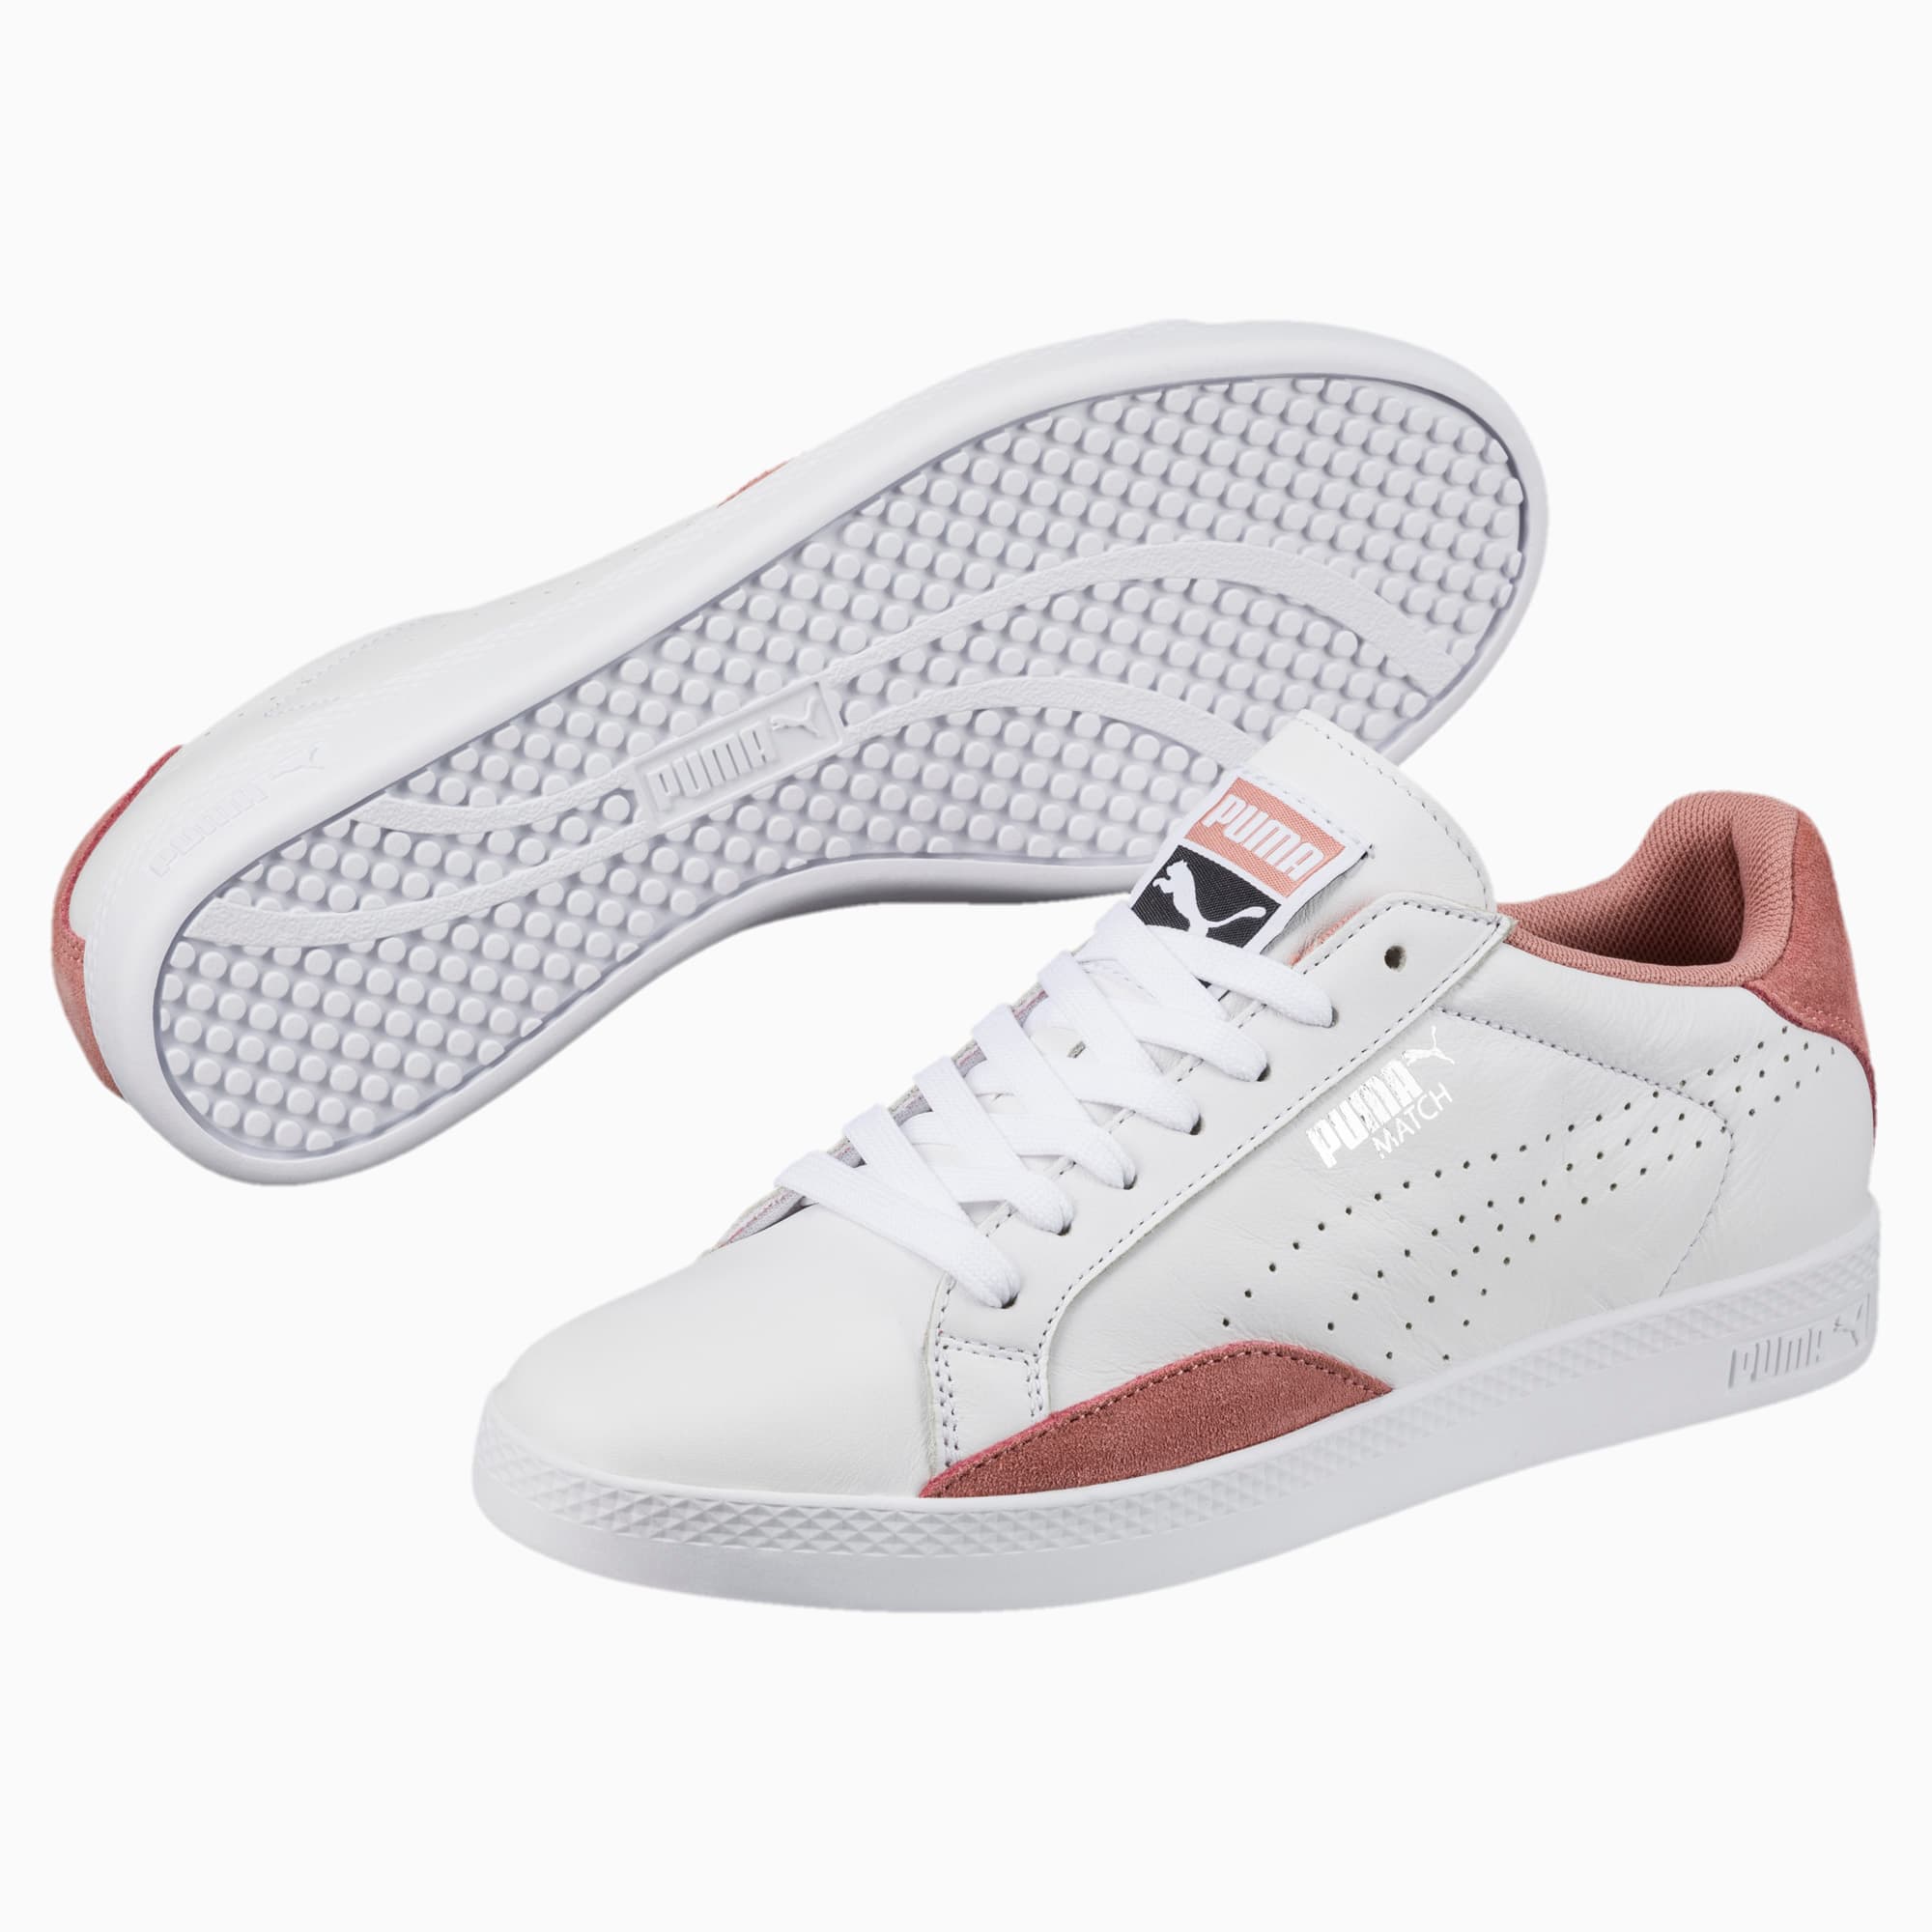 puma rubber shoes for ladies